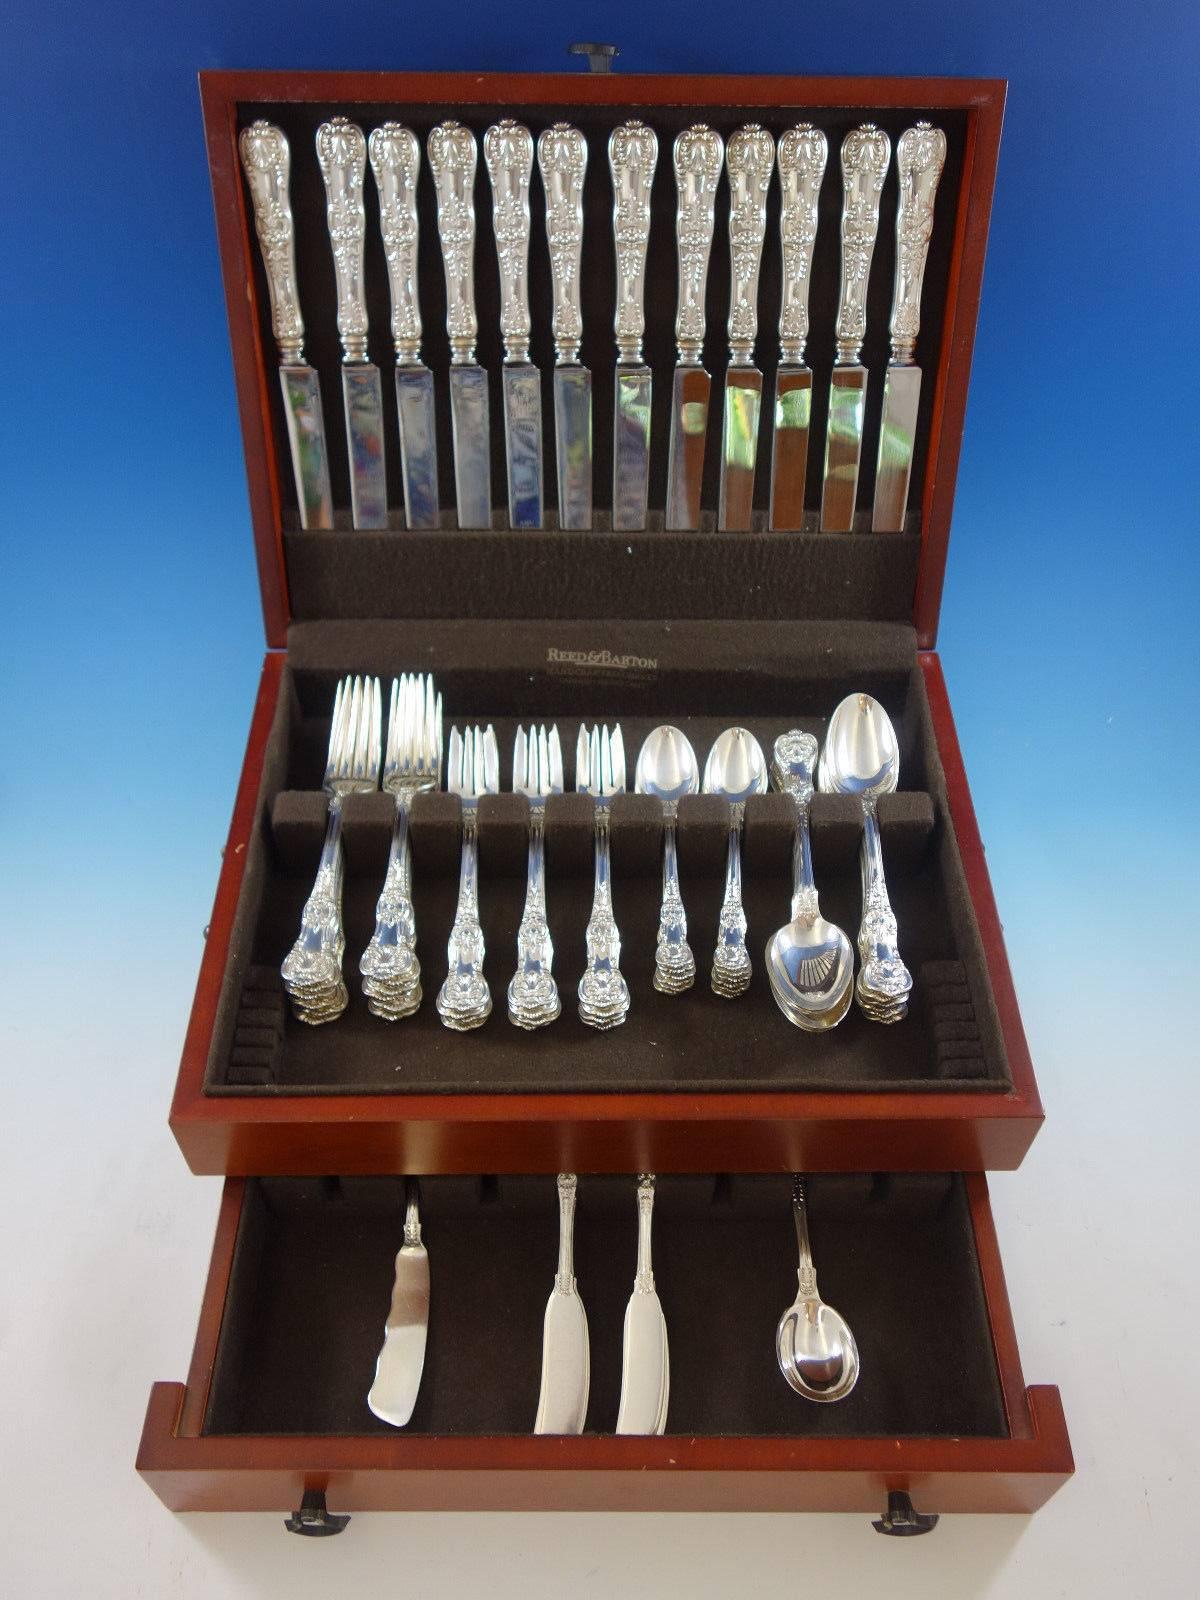 English King by Tiffany & Co. sterling silver flatware set of 74 pieces. This set includes: 12 dinner size knives, 10 1/4